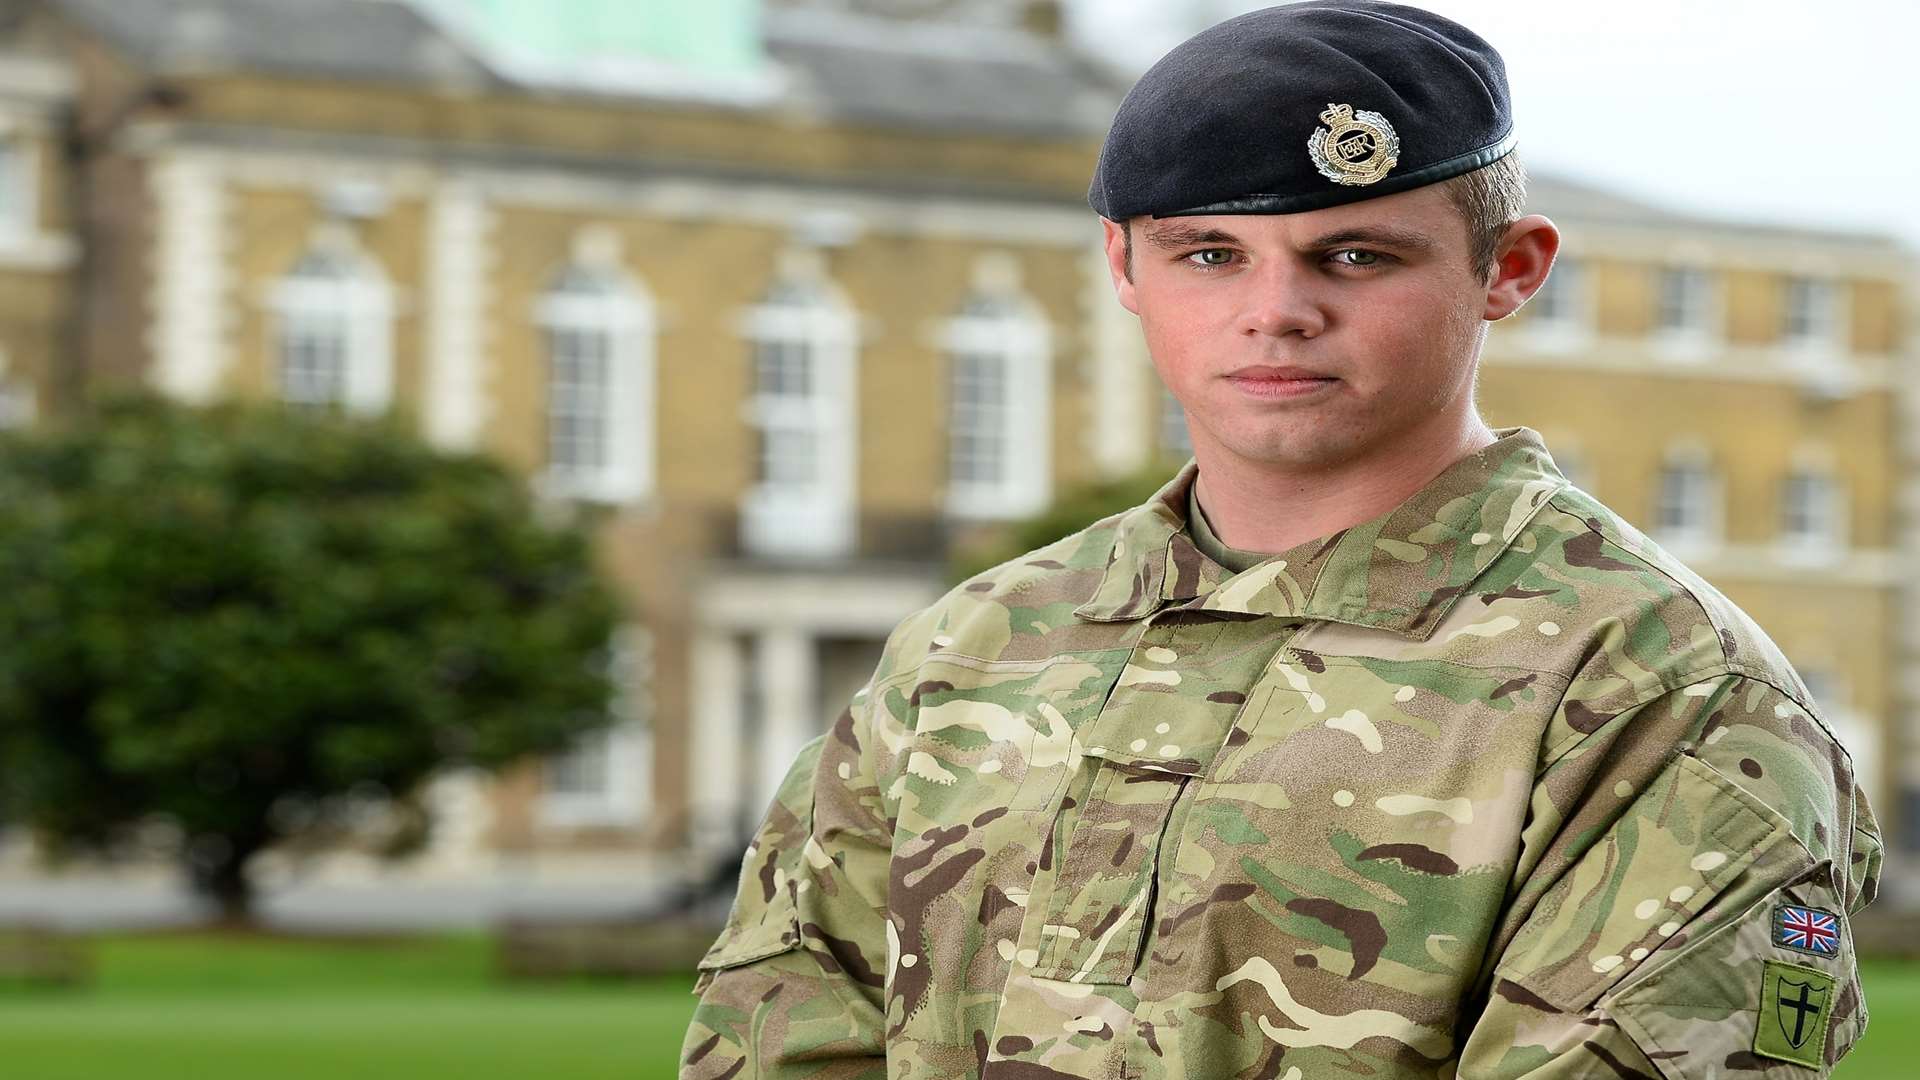 Sapper James McDermott, of Maidstone's 36 Engineer Regiment, was previously recognised for saving the lives of two other servicemen